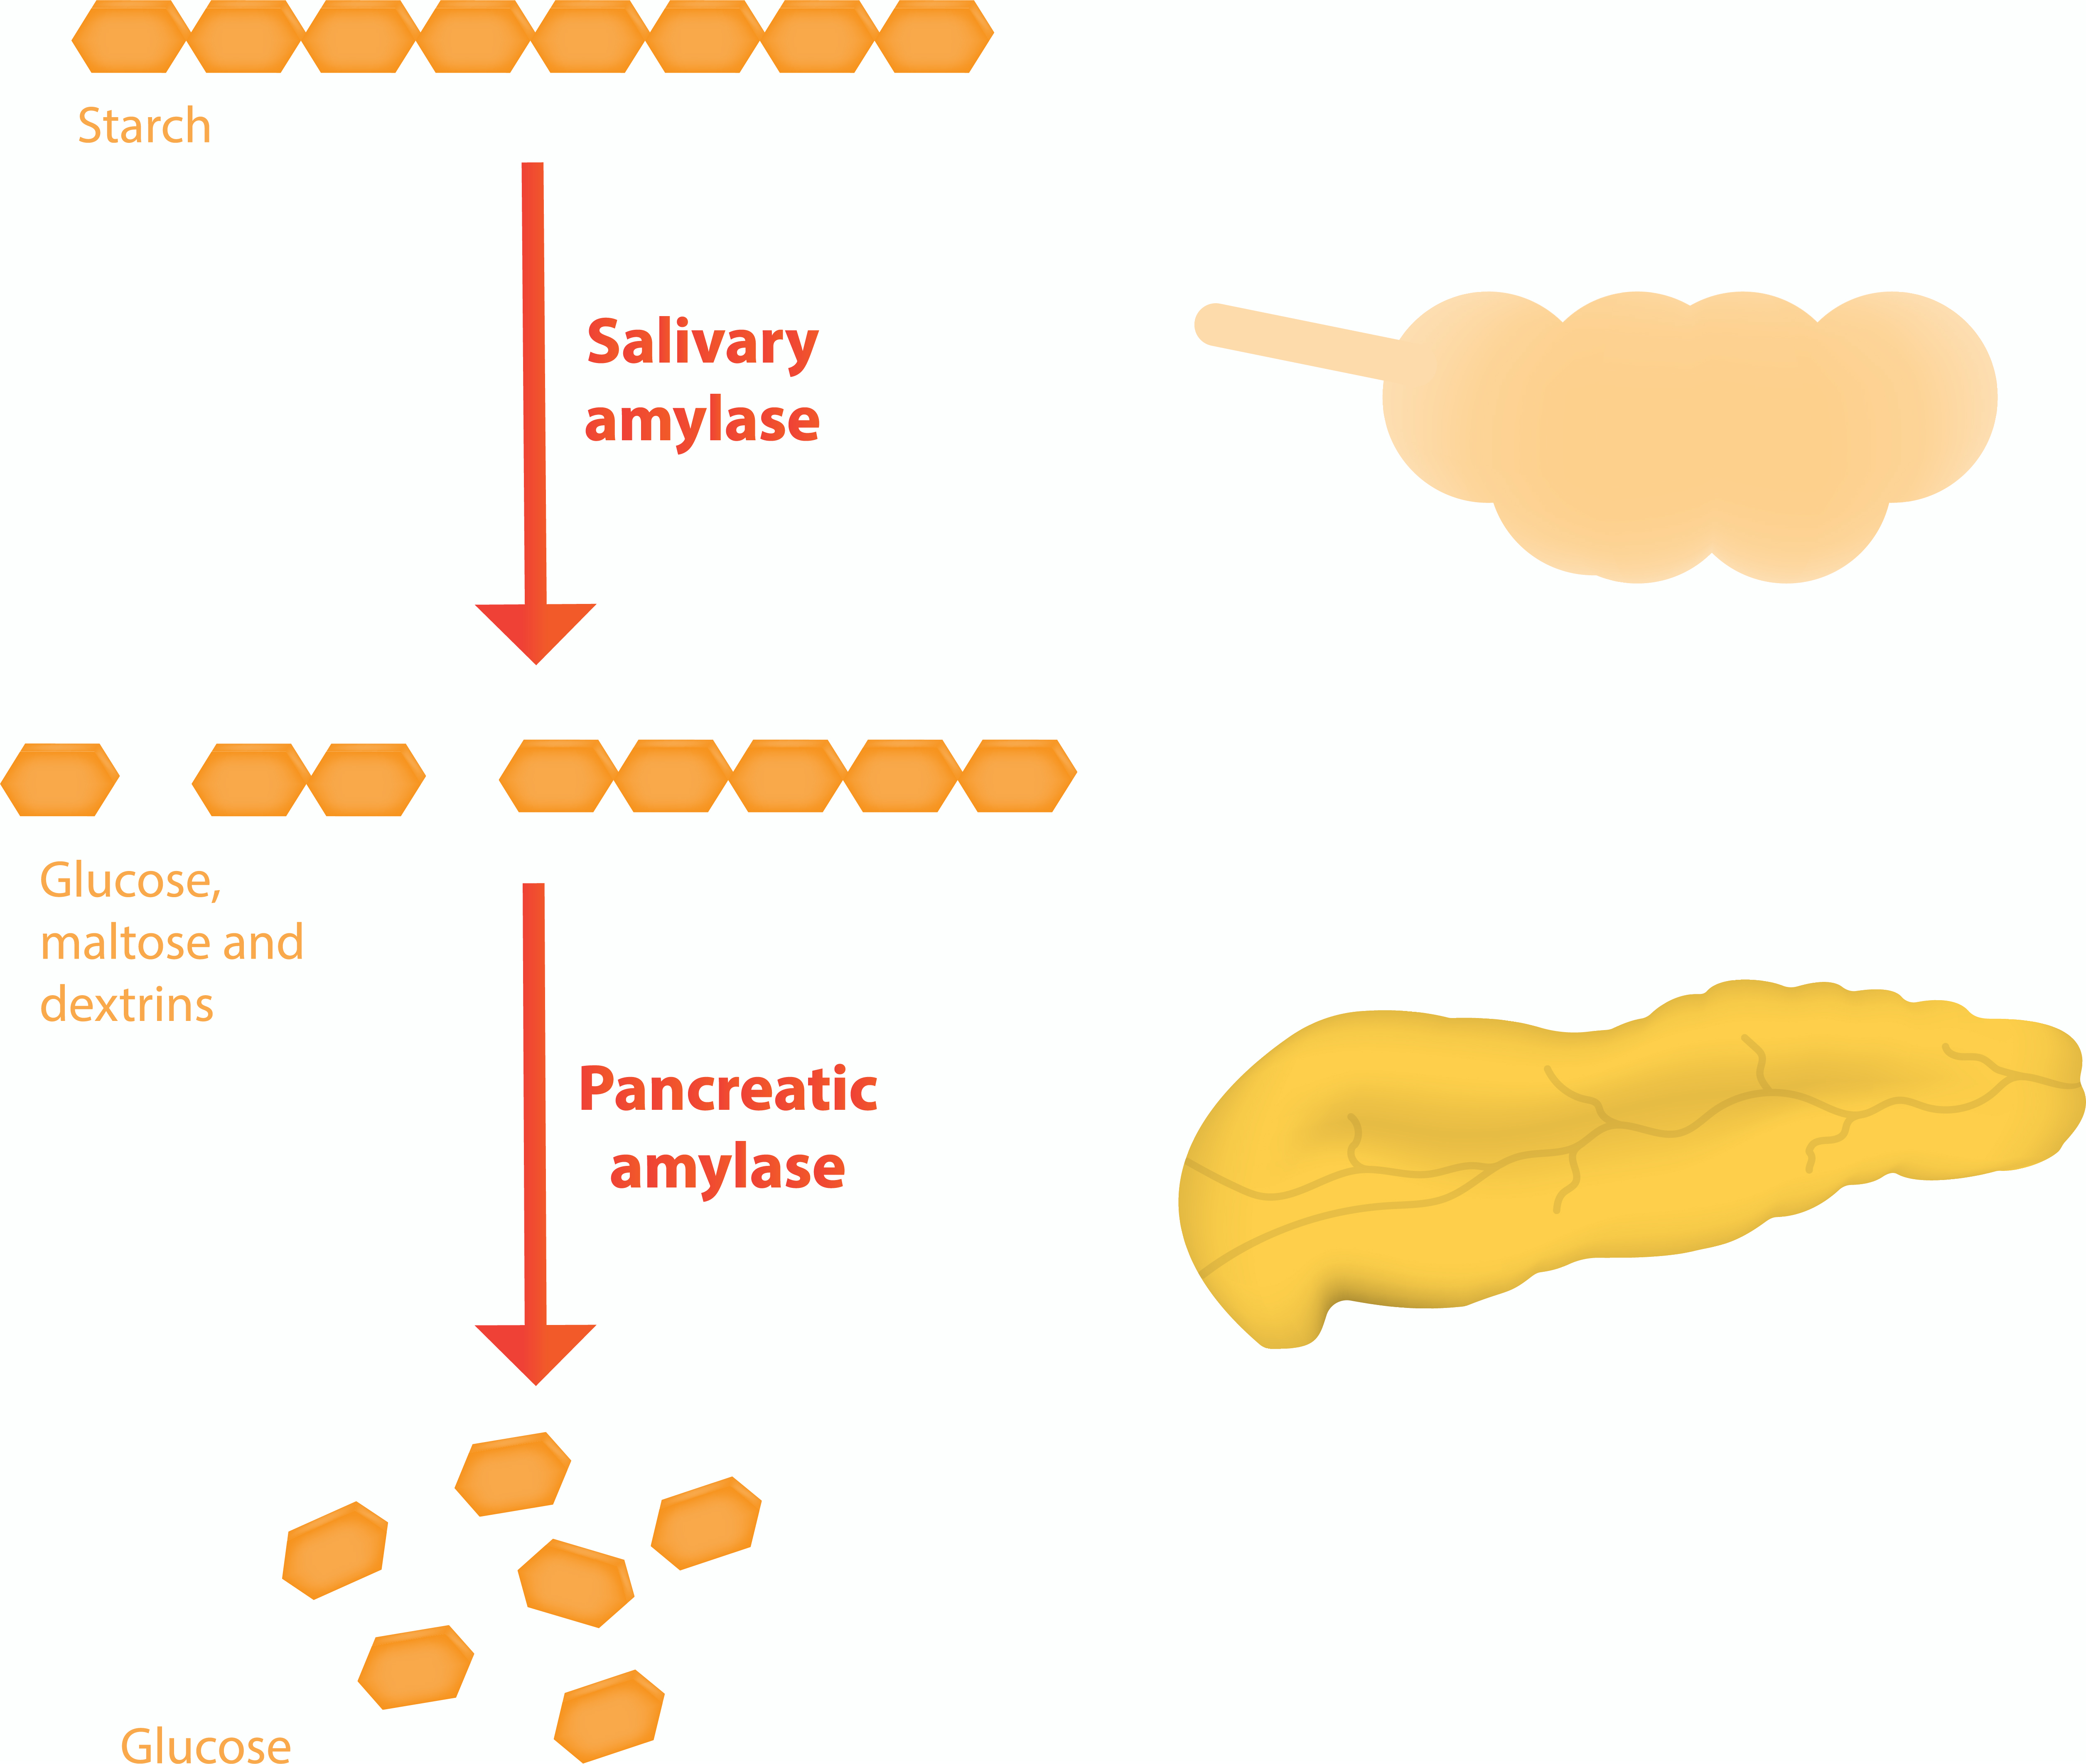 Digestive enzymes break down substances to allow our body to digest them more easily